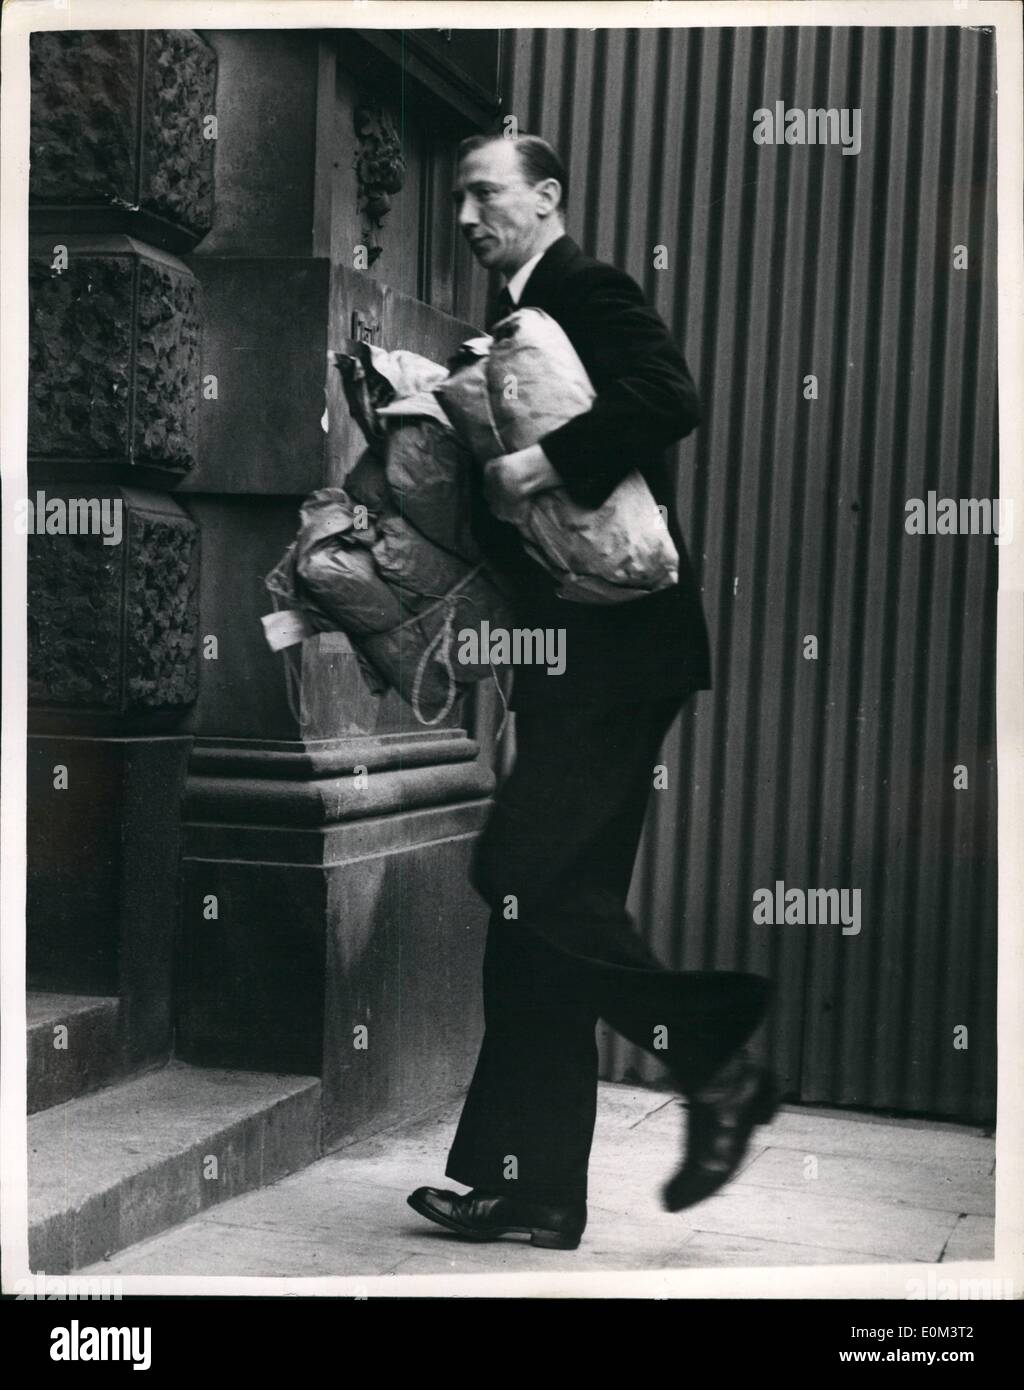 Jun. 06, 1953 - Christie Trial Opens At The Old Bailey. The trial of John Reginald Halliday Christie, charged with murdering his wife and three other women, started at the Old Bailey. Photo Shows:- Police officer carries various pieces of evidence into the Old Bailey. Stock Photo